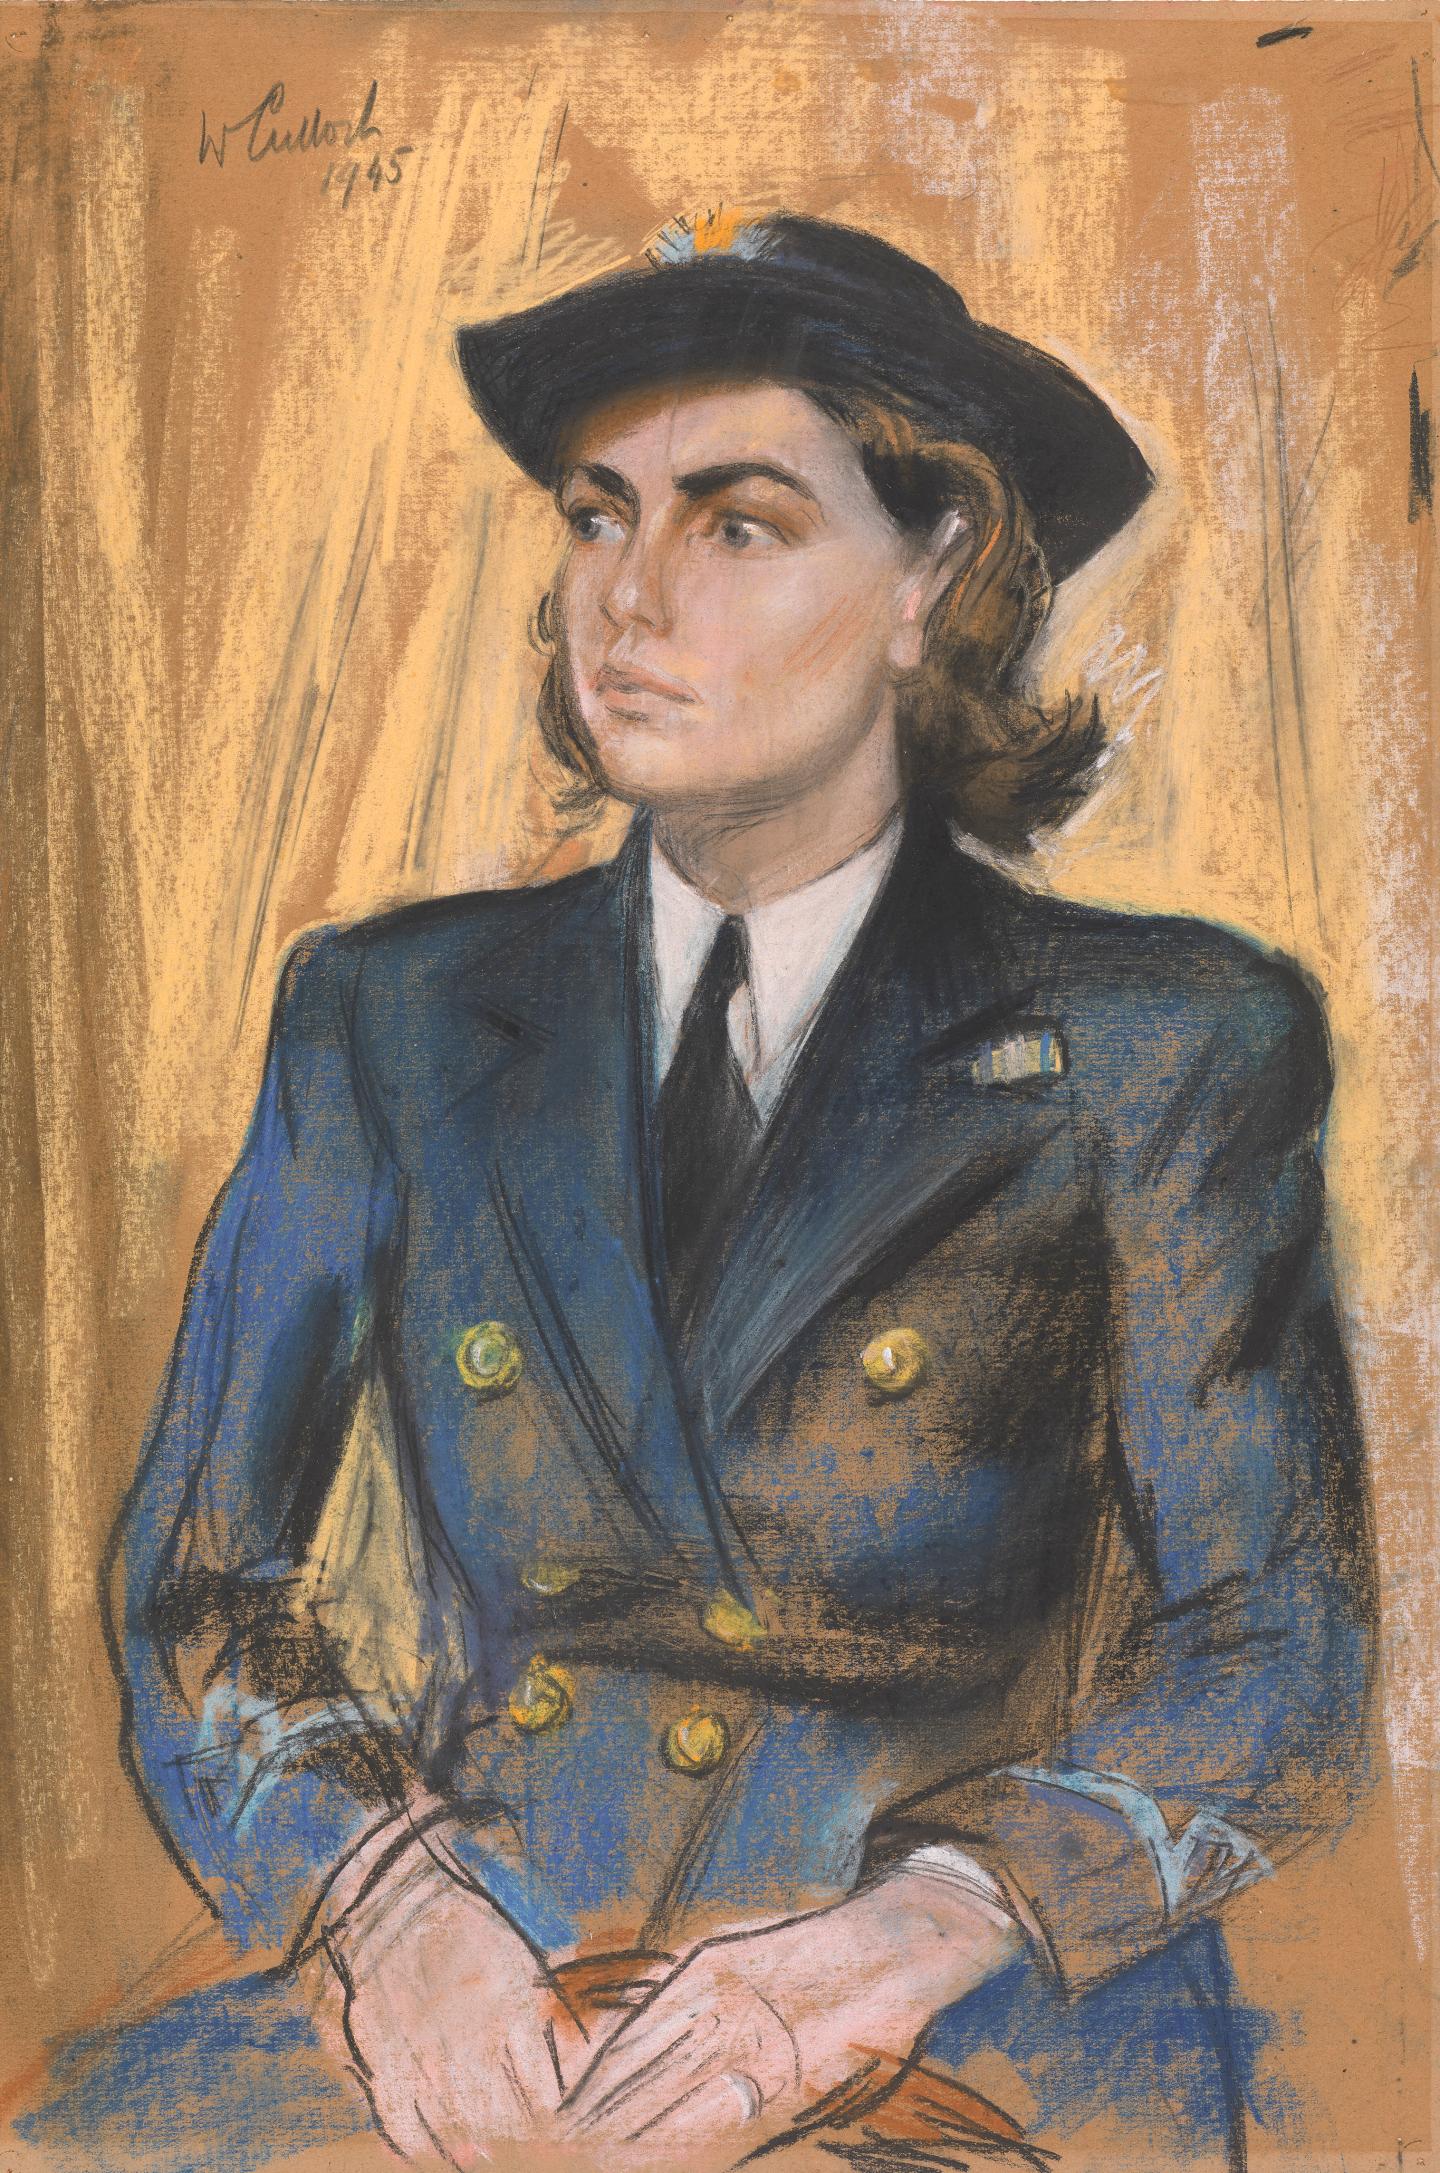 A pastel portrait of a female naval officer looking to the side and wearing a blue uniform and a hat